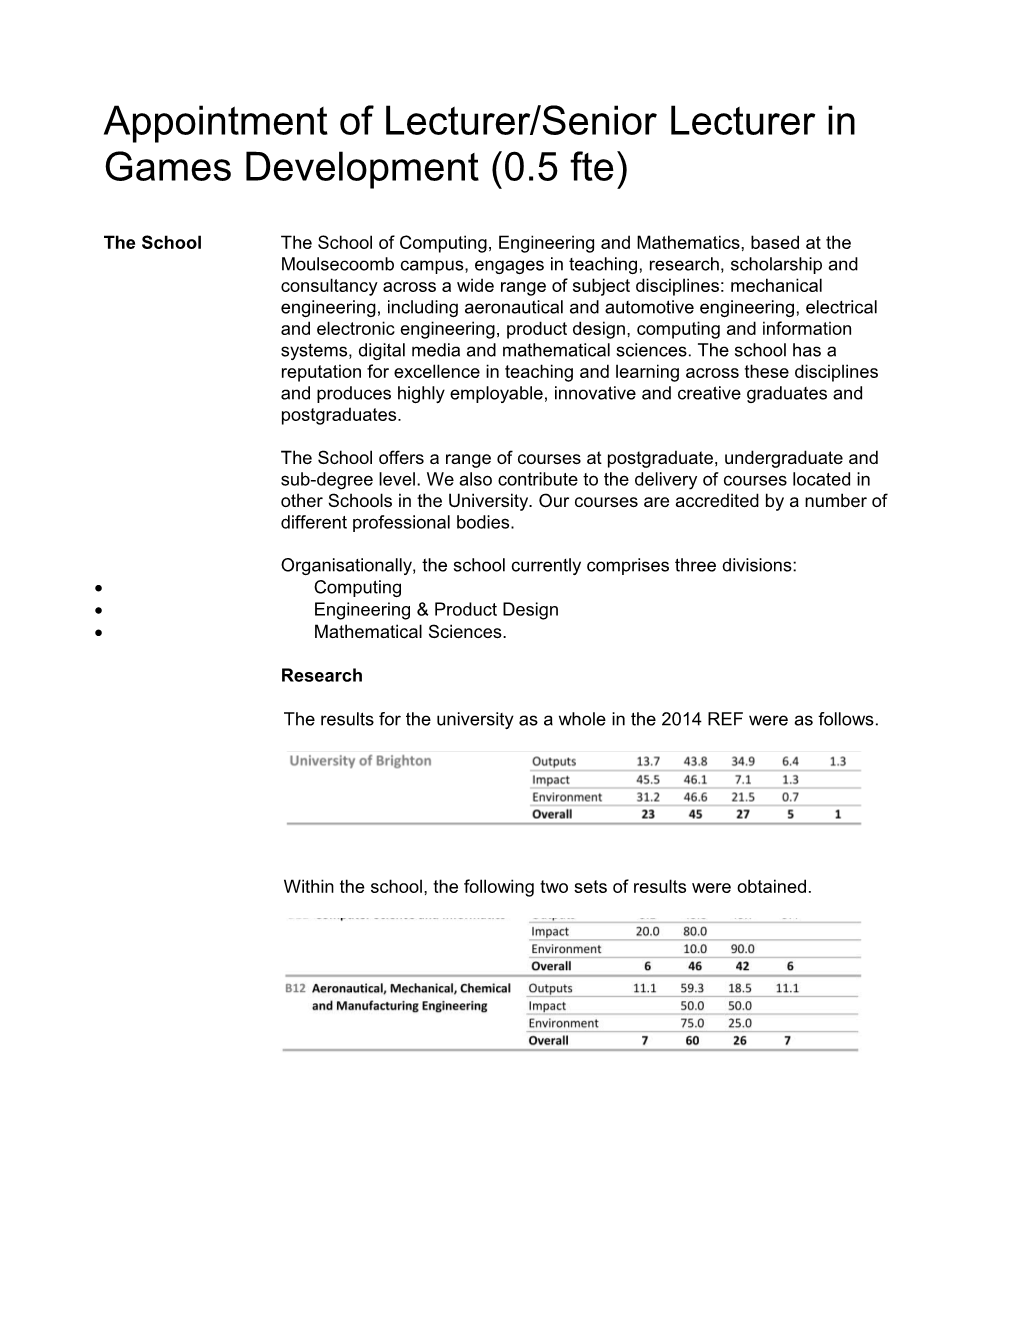 Appointment of Lecturer/Seniorlecturer in Games Development (0.5Fte)